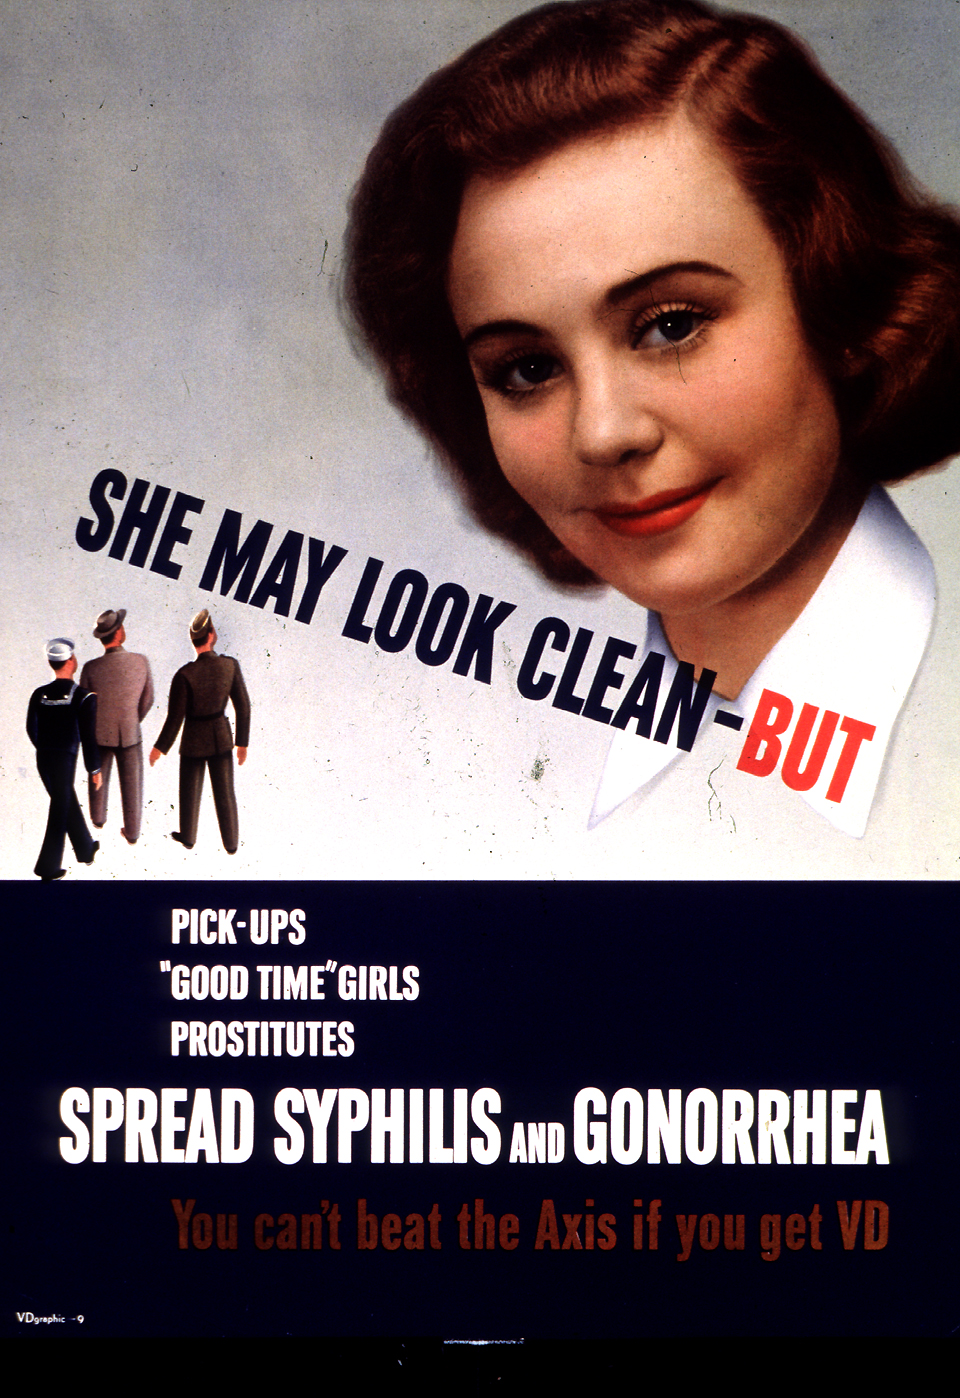 Visual Culture and Public Health Posters - Infectious 